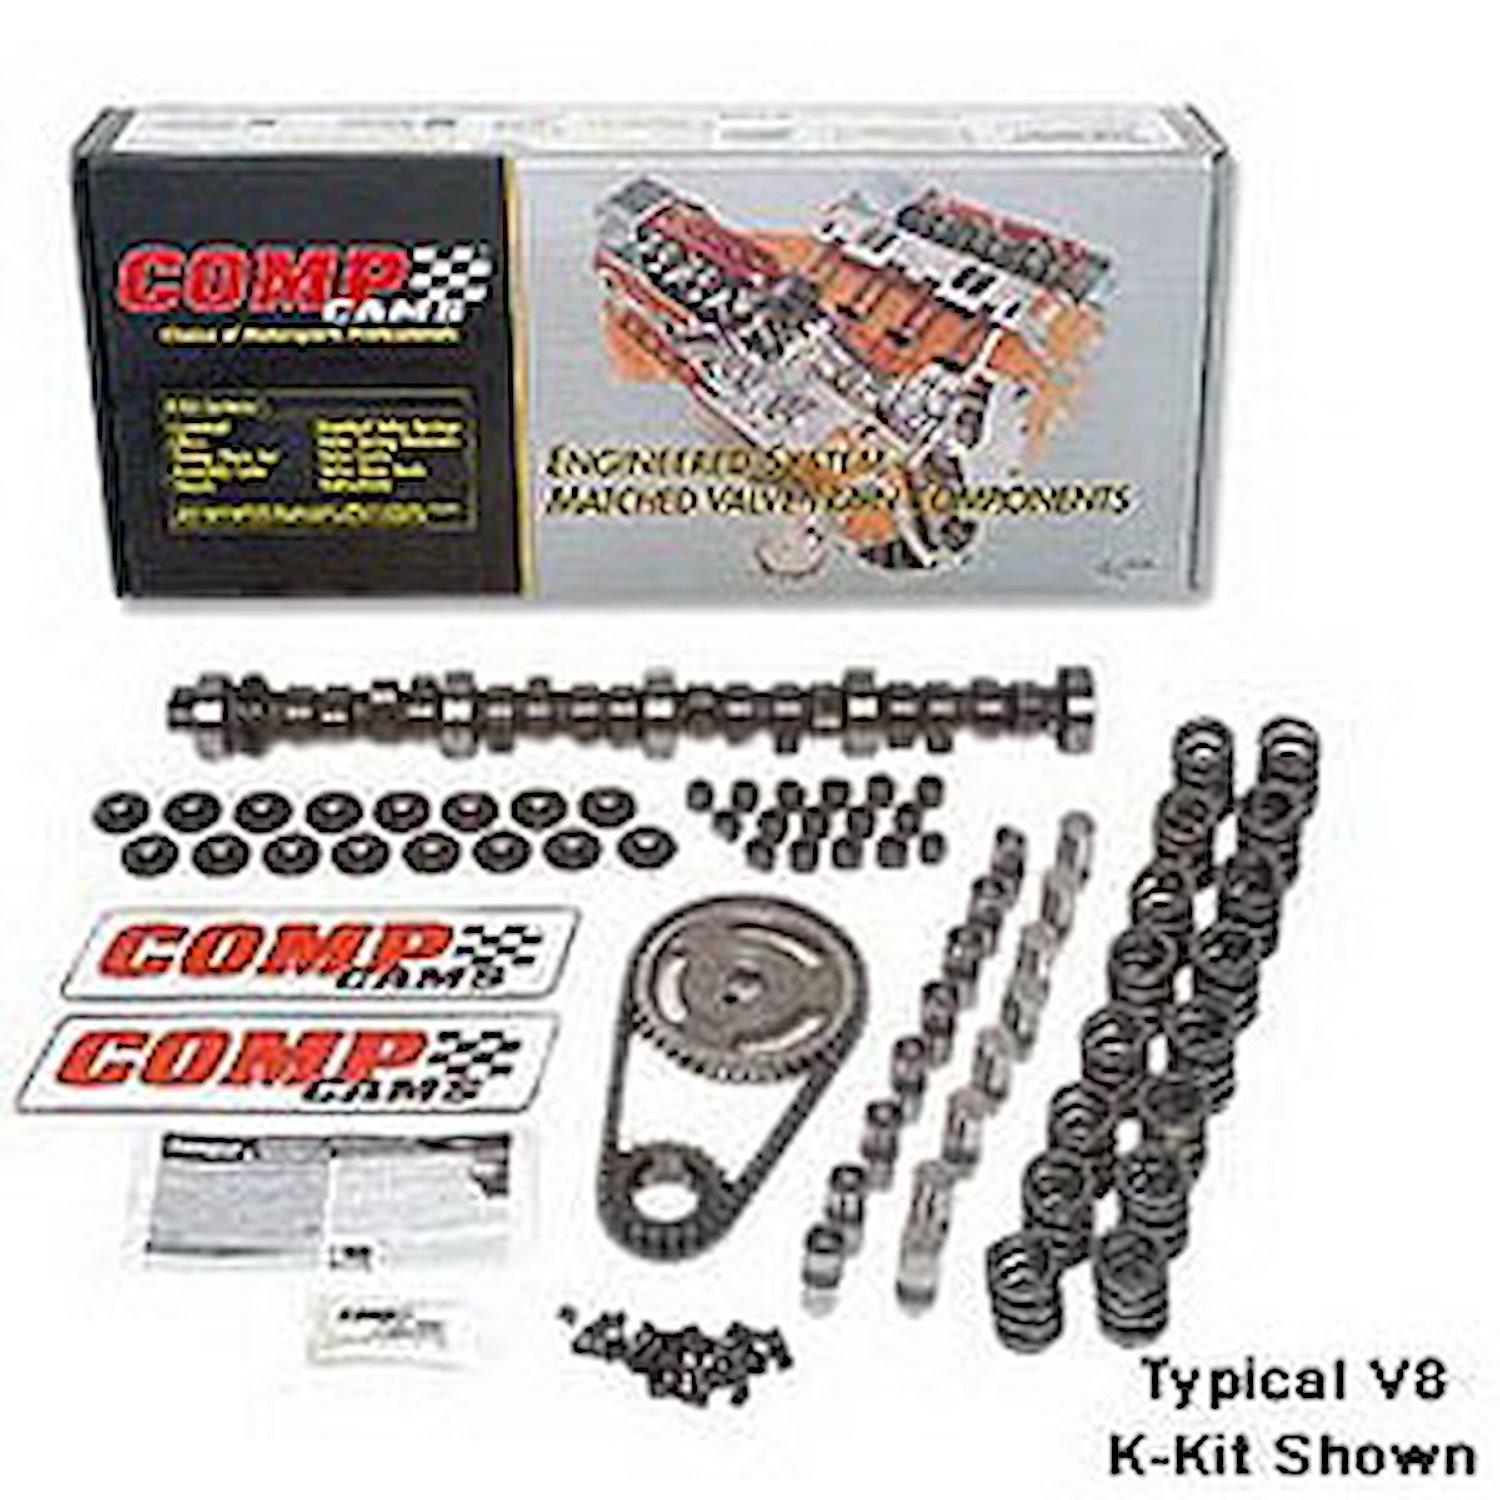 Magnum Hydraulic Roller Camshaft Complete Kit Chevy 4.3L V6 1980-97 Lift: .500"/.500"